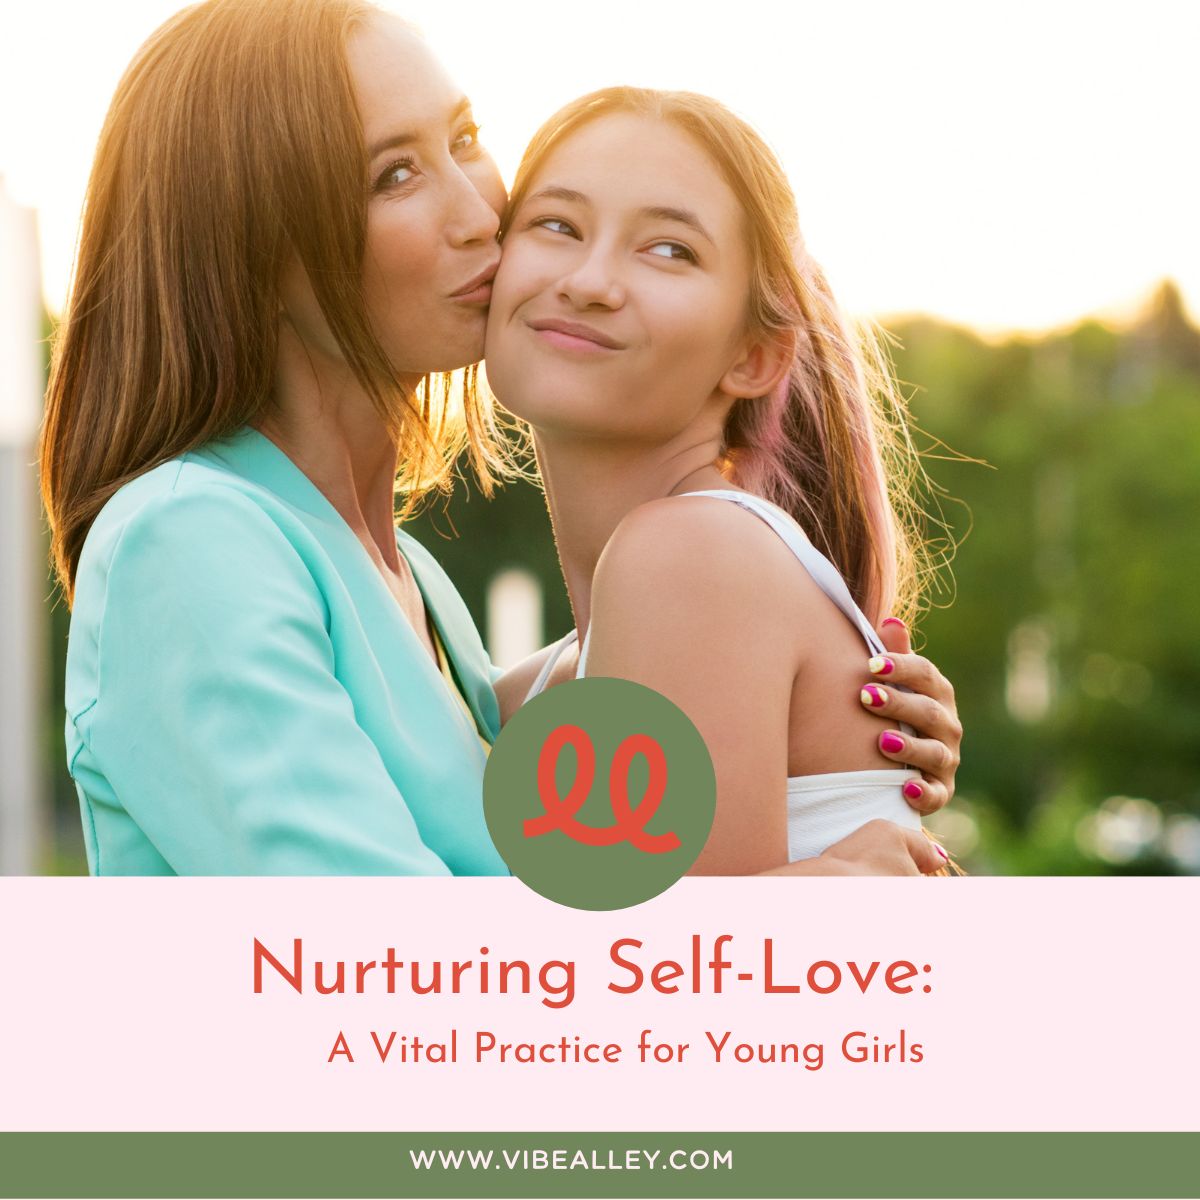 Nurturing Self-Love: A Vital Practice for Young Girls